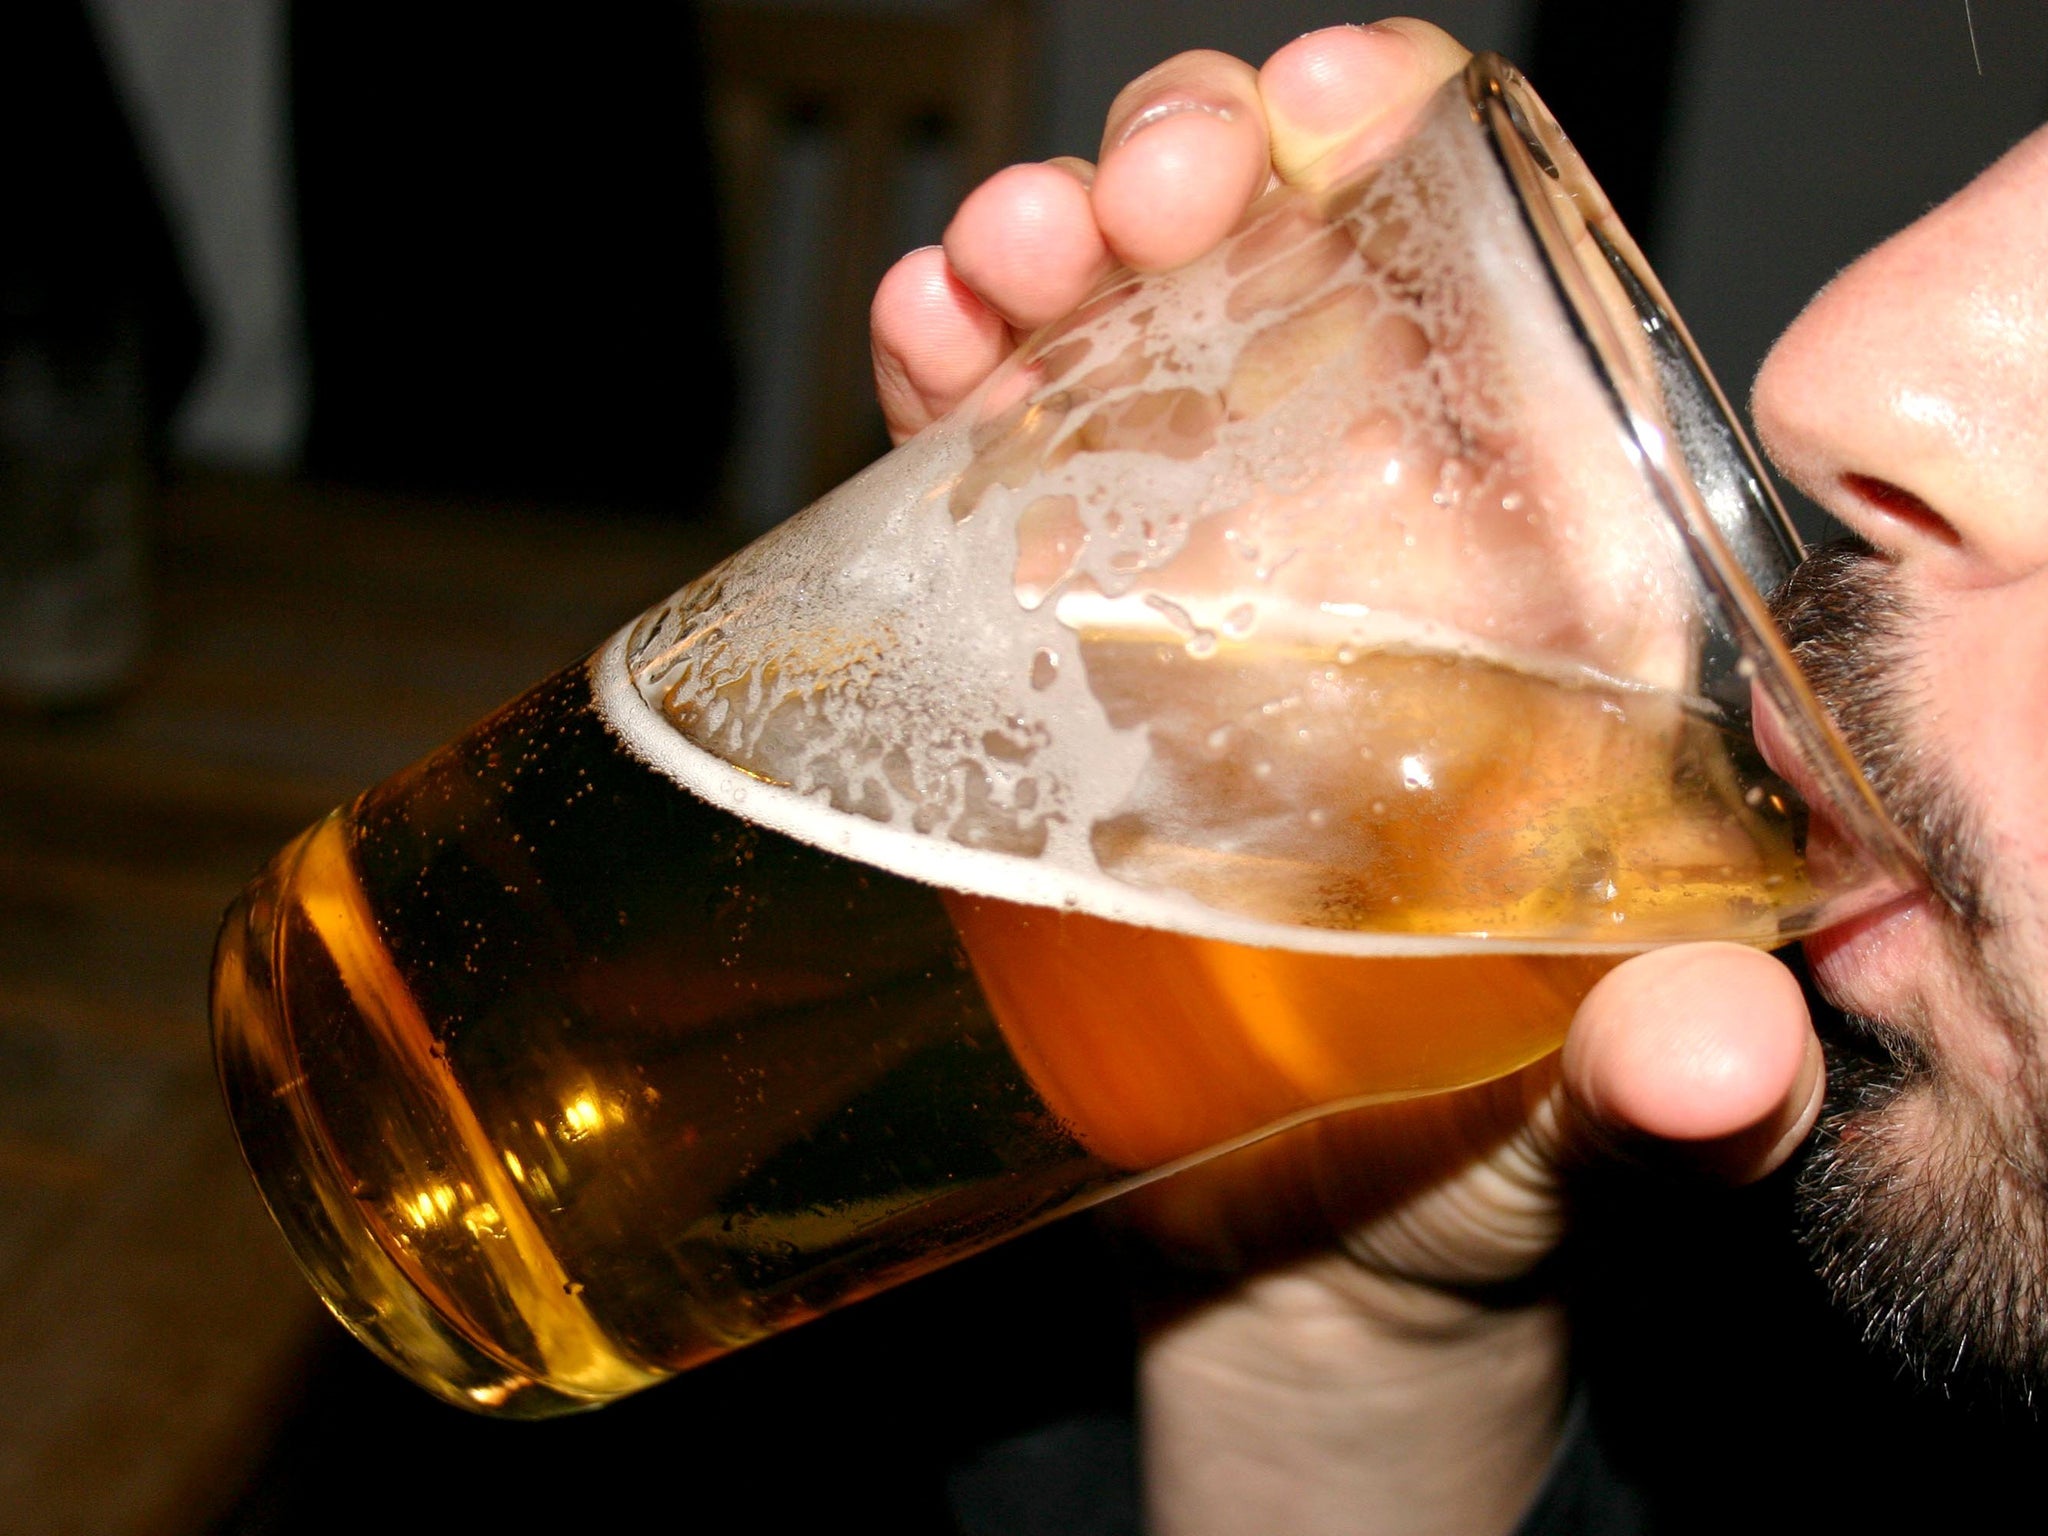 The study suggests that around half of all English men and women can be classified as binge drinkers